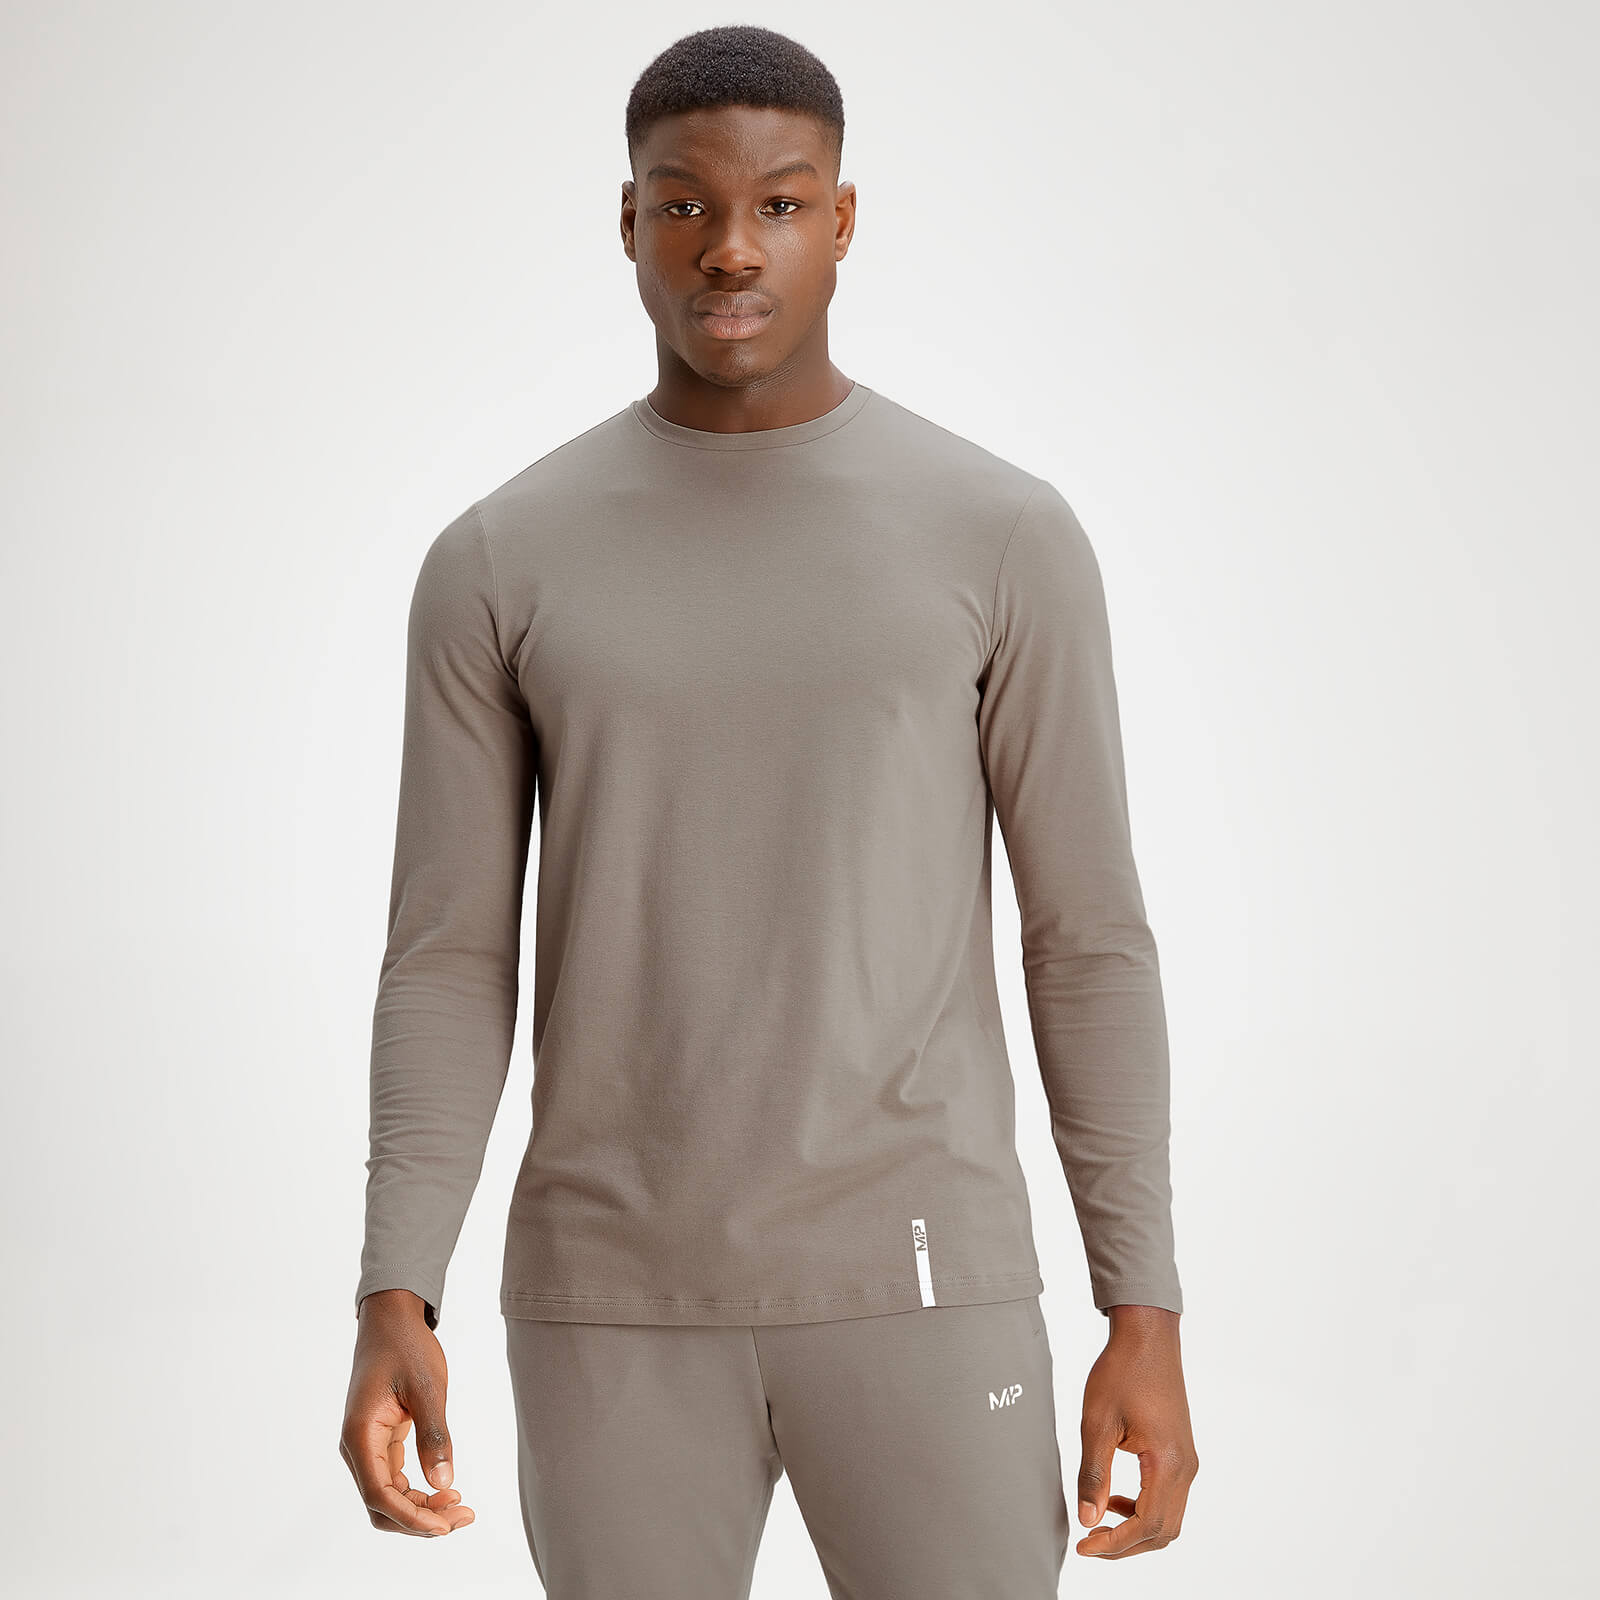 MP Men's Luxe Classic Long Sleeve Crew Top - Taupe - XS